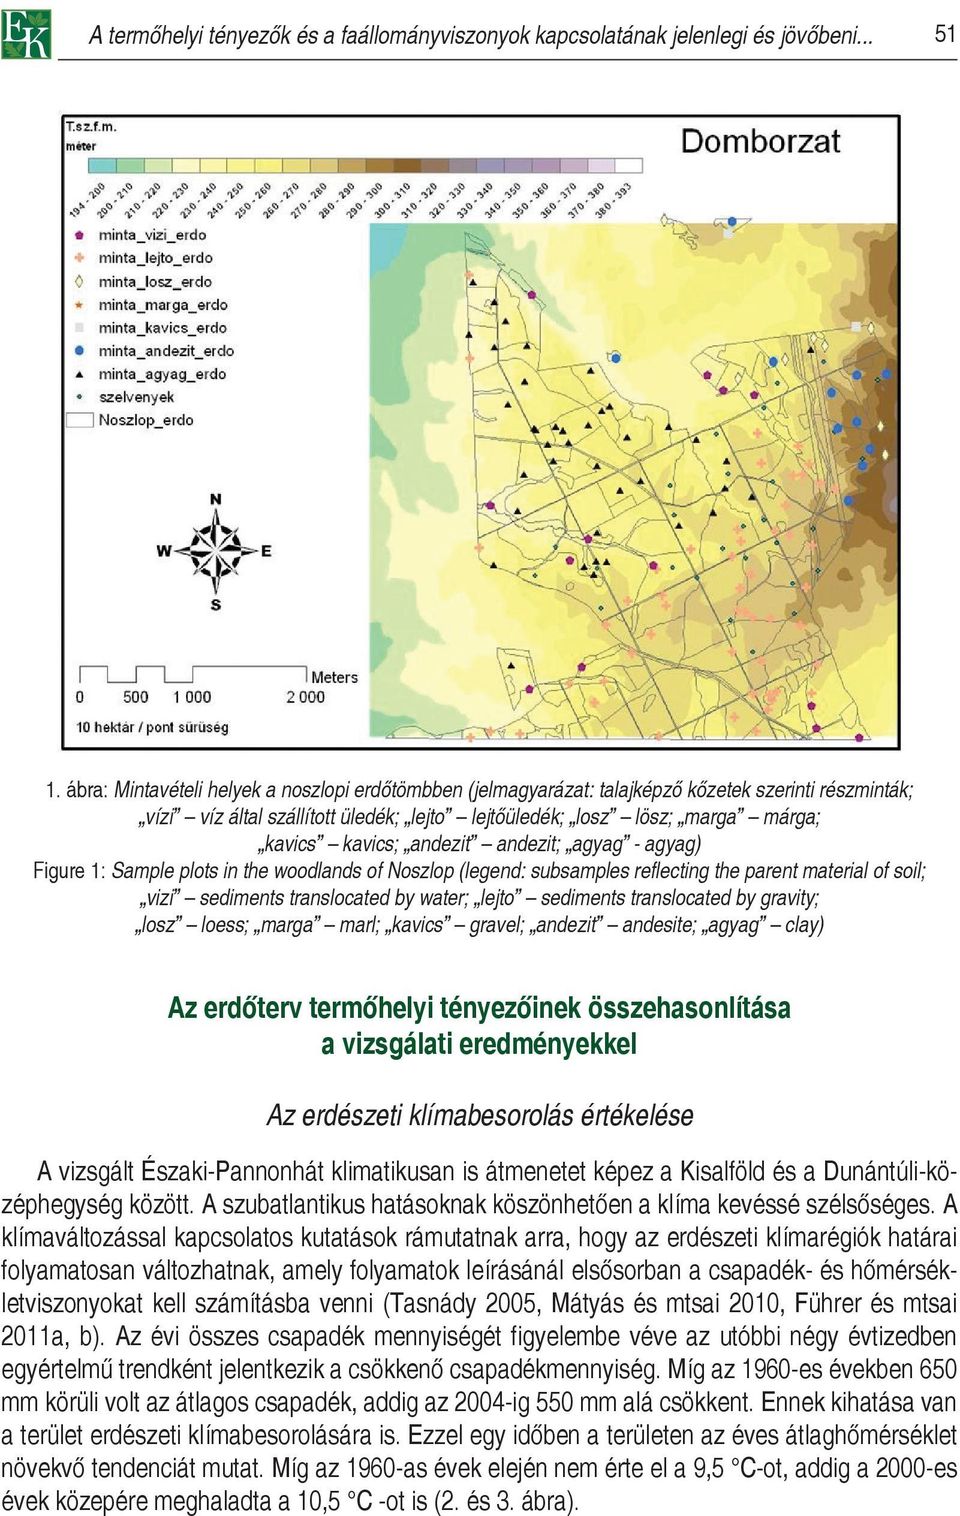 andezit andezit; agyag - agyag) Figure 1: Sample plots in the woodlands of Noszlop (legend: subsamples reflecting the parent material of soil; vizi sediments translocated by water; lejto sediments